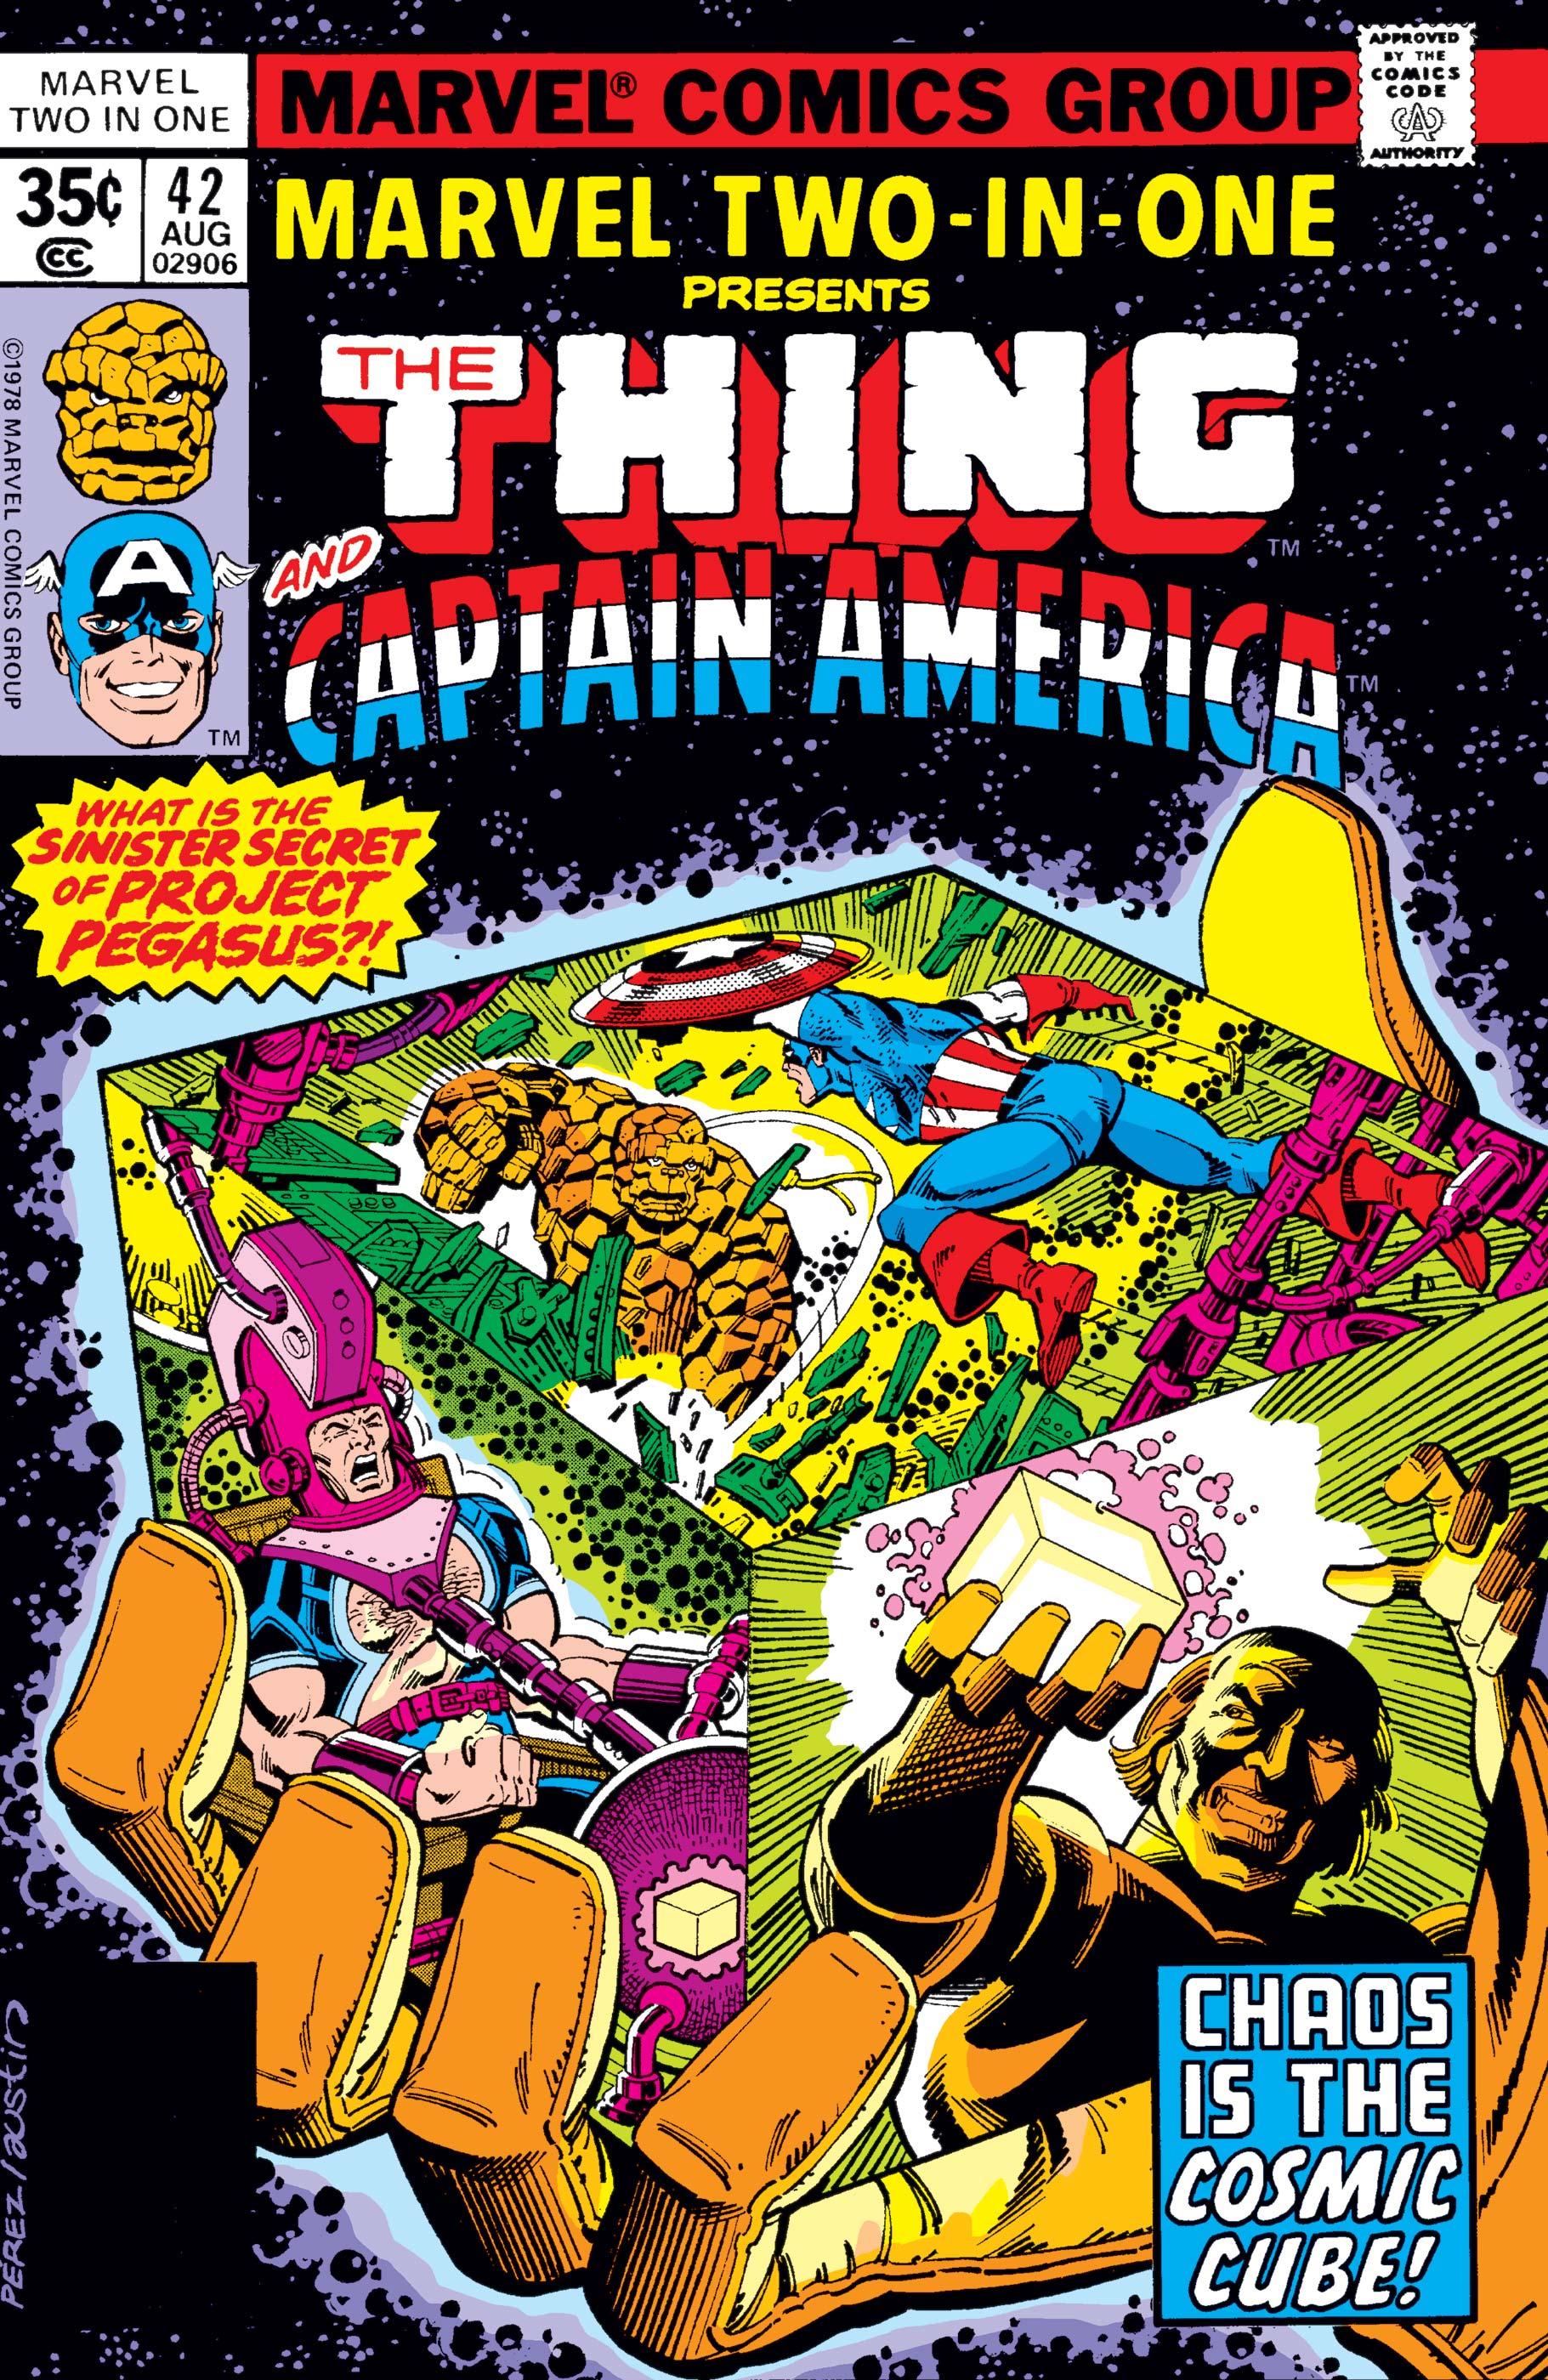 Marvel Two-in-One (1974) #42